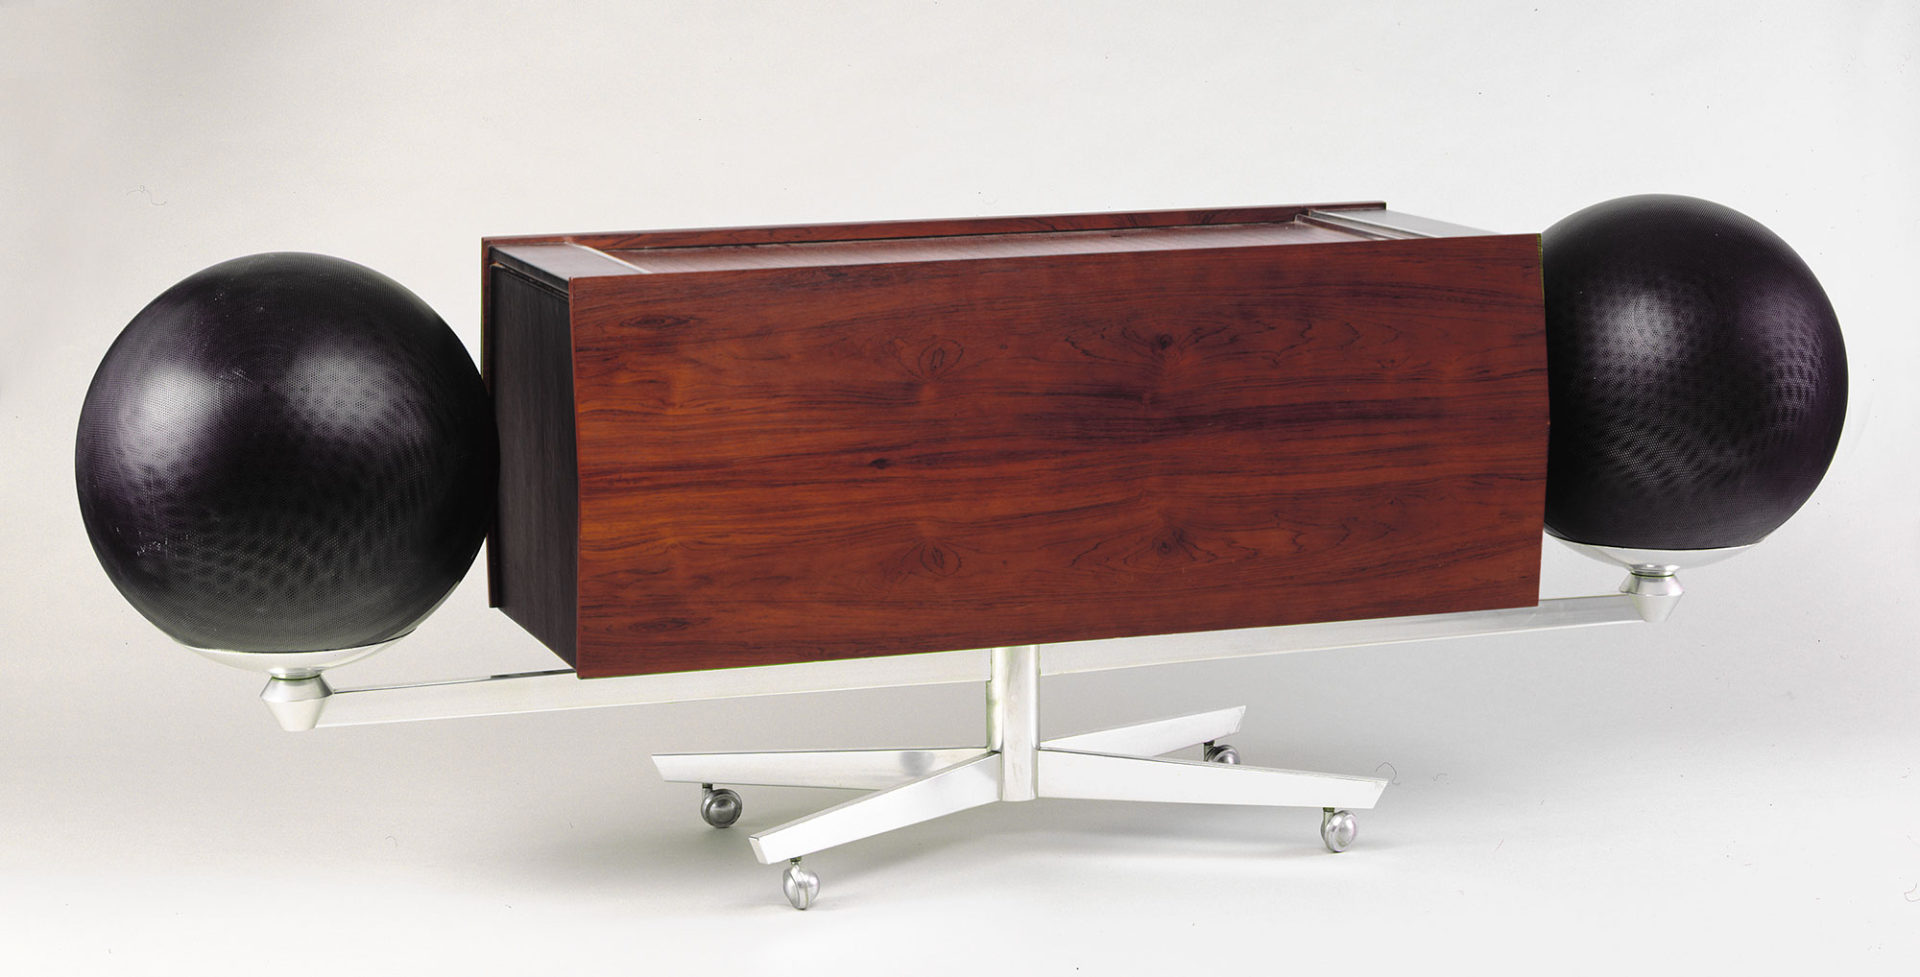 Rectangular wooden cabinet with a large black spherical speaker at each end, mounted on an angular aluminum base.